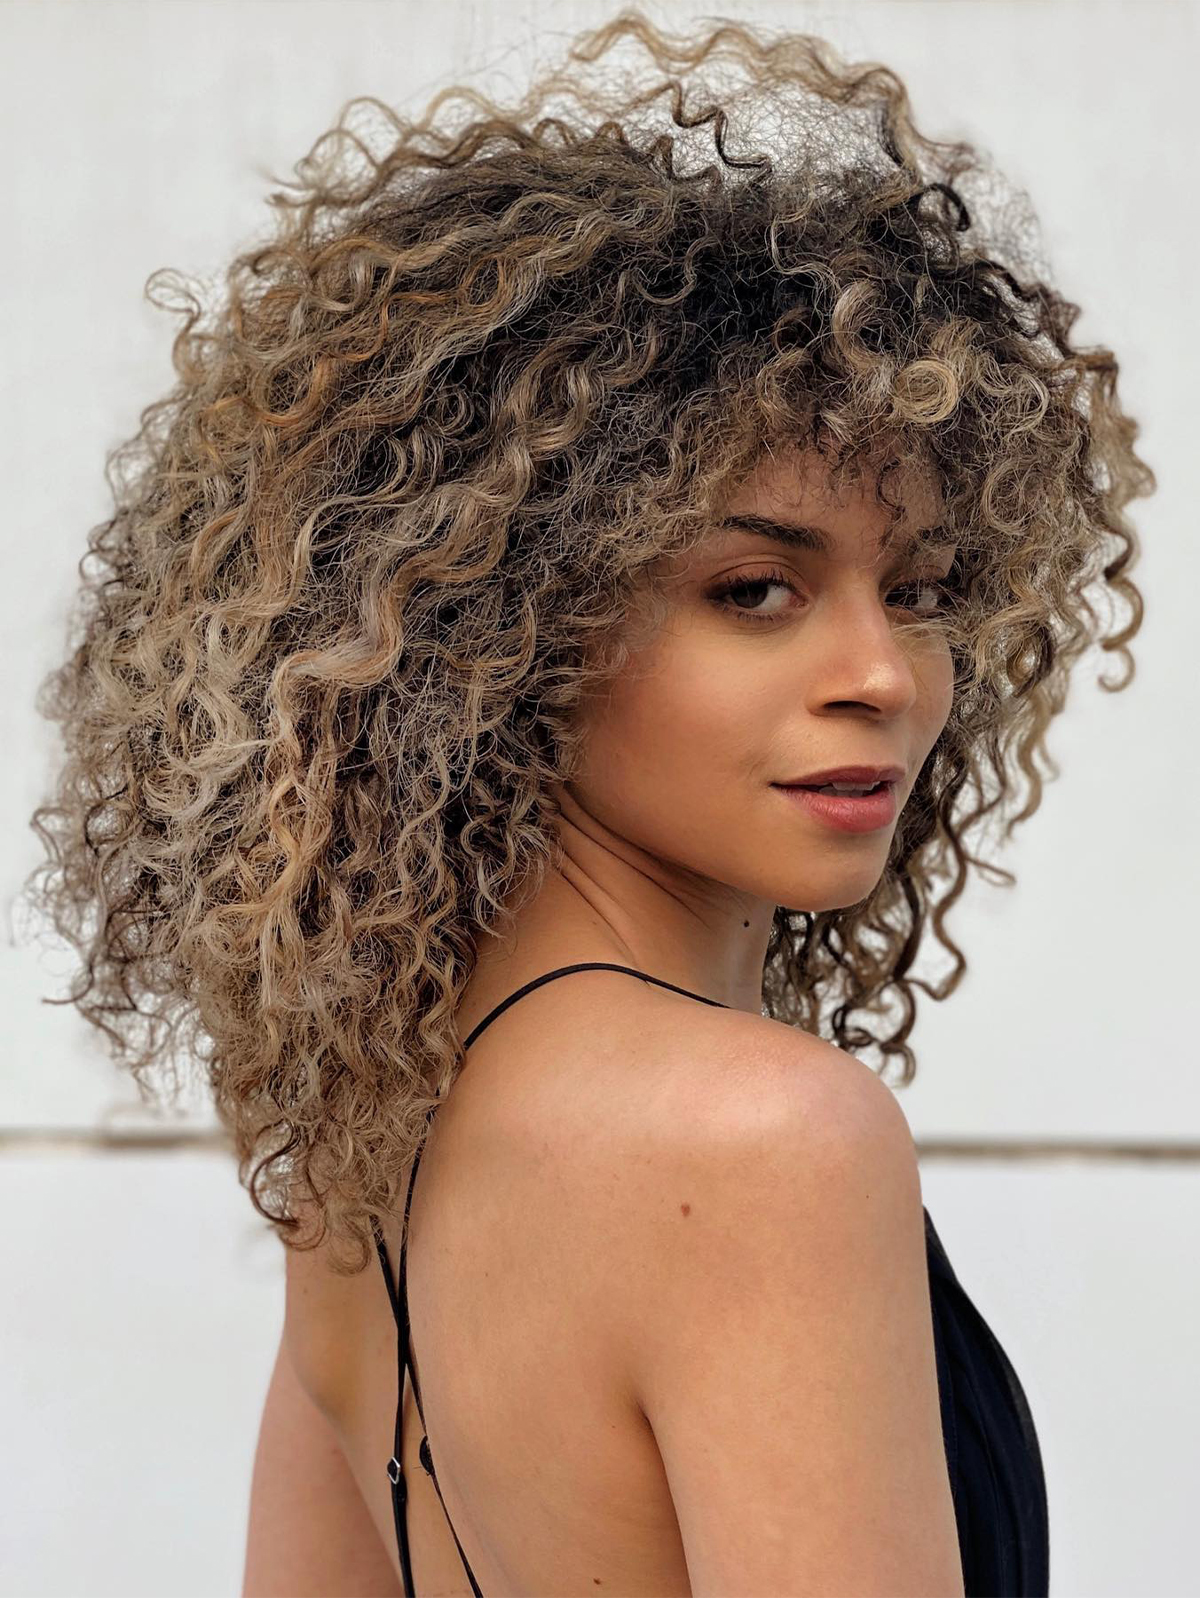 15 Low-Maintenance Haircuts for Thick Hair That Are So Chic | Who What Wear